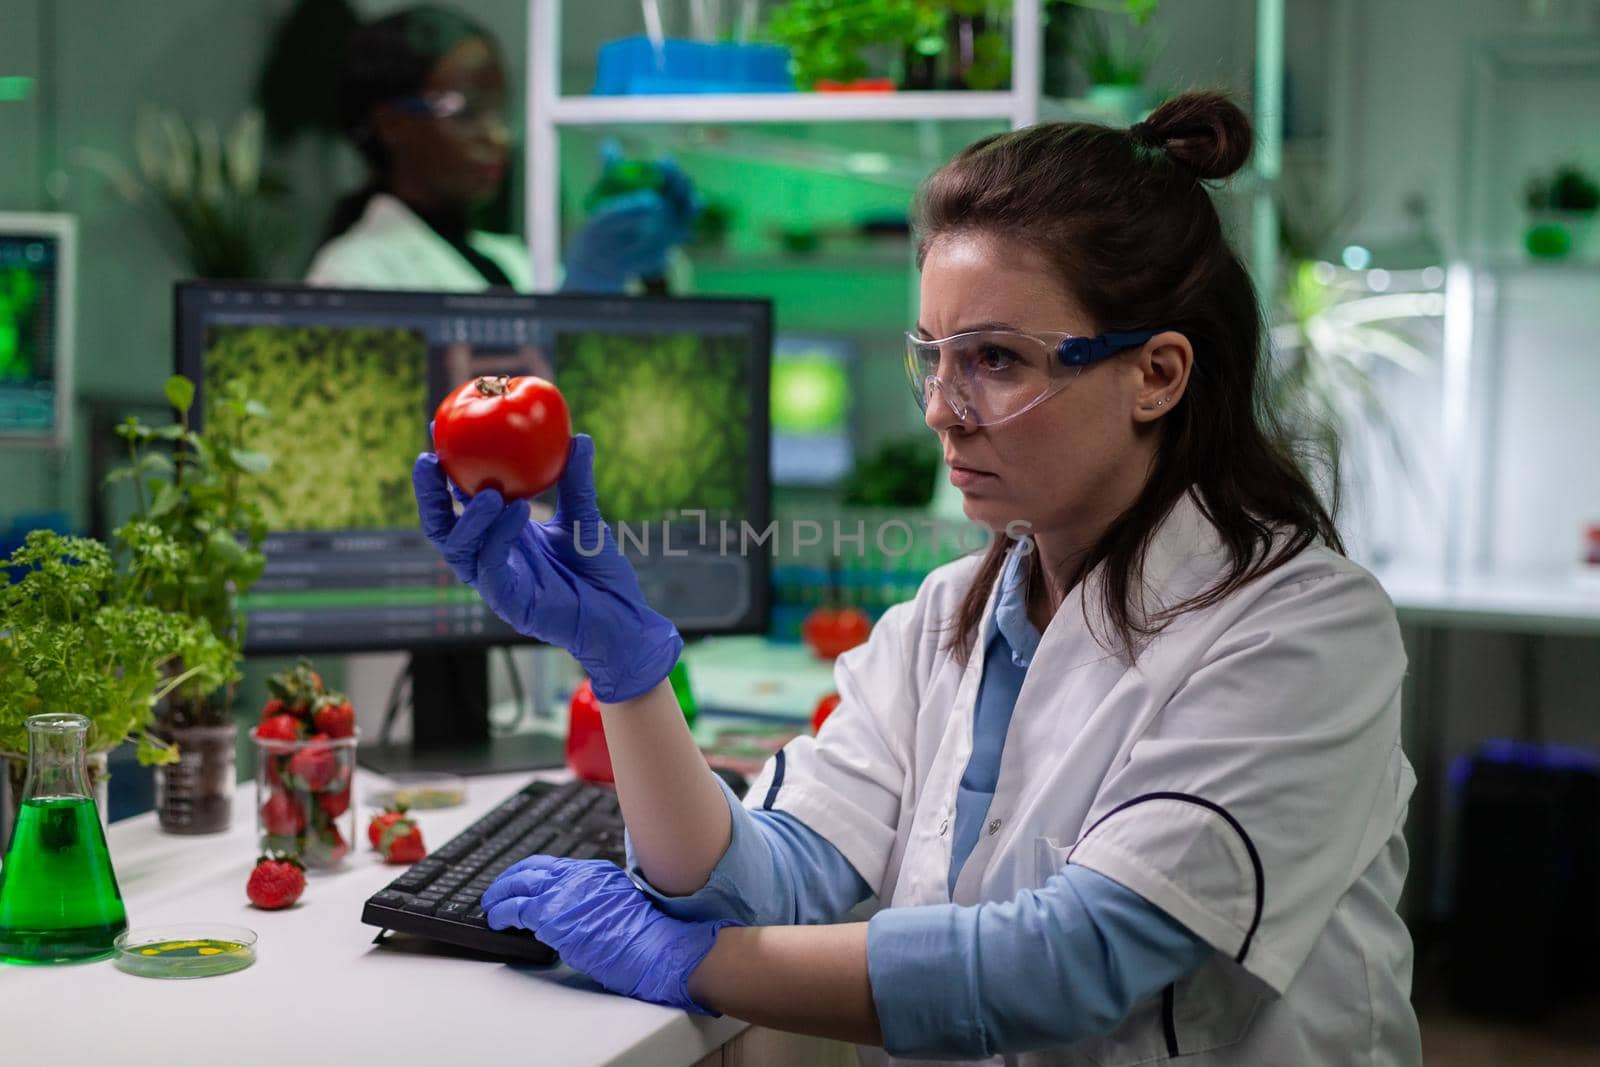 Biologist researcher woman analyzing organic tomato during microbiology experiment by DCStudio